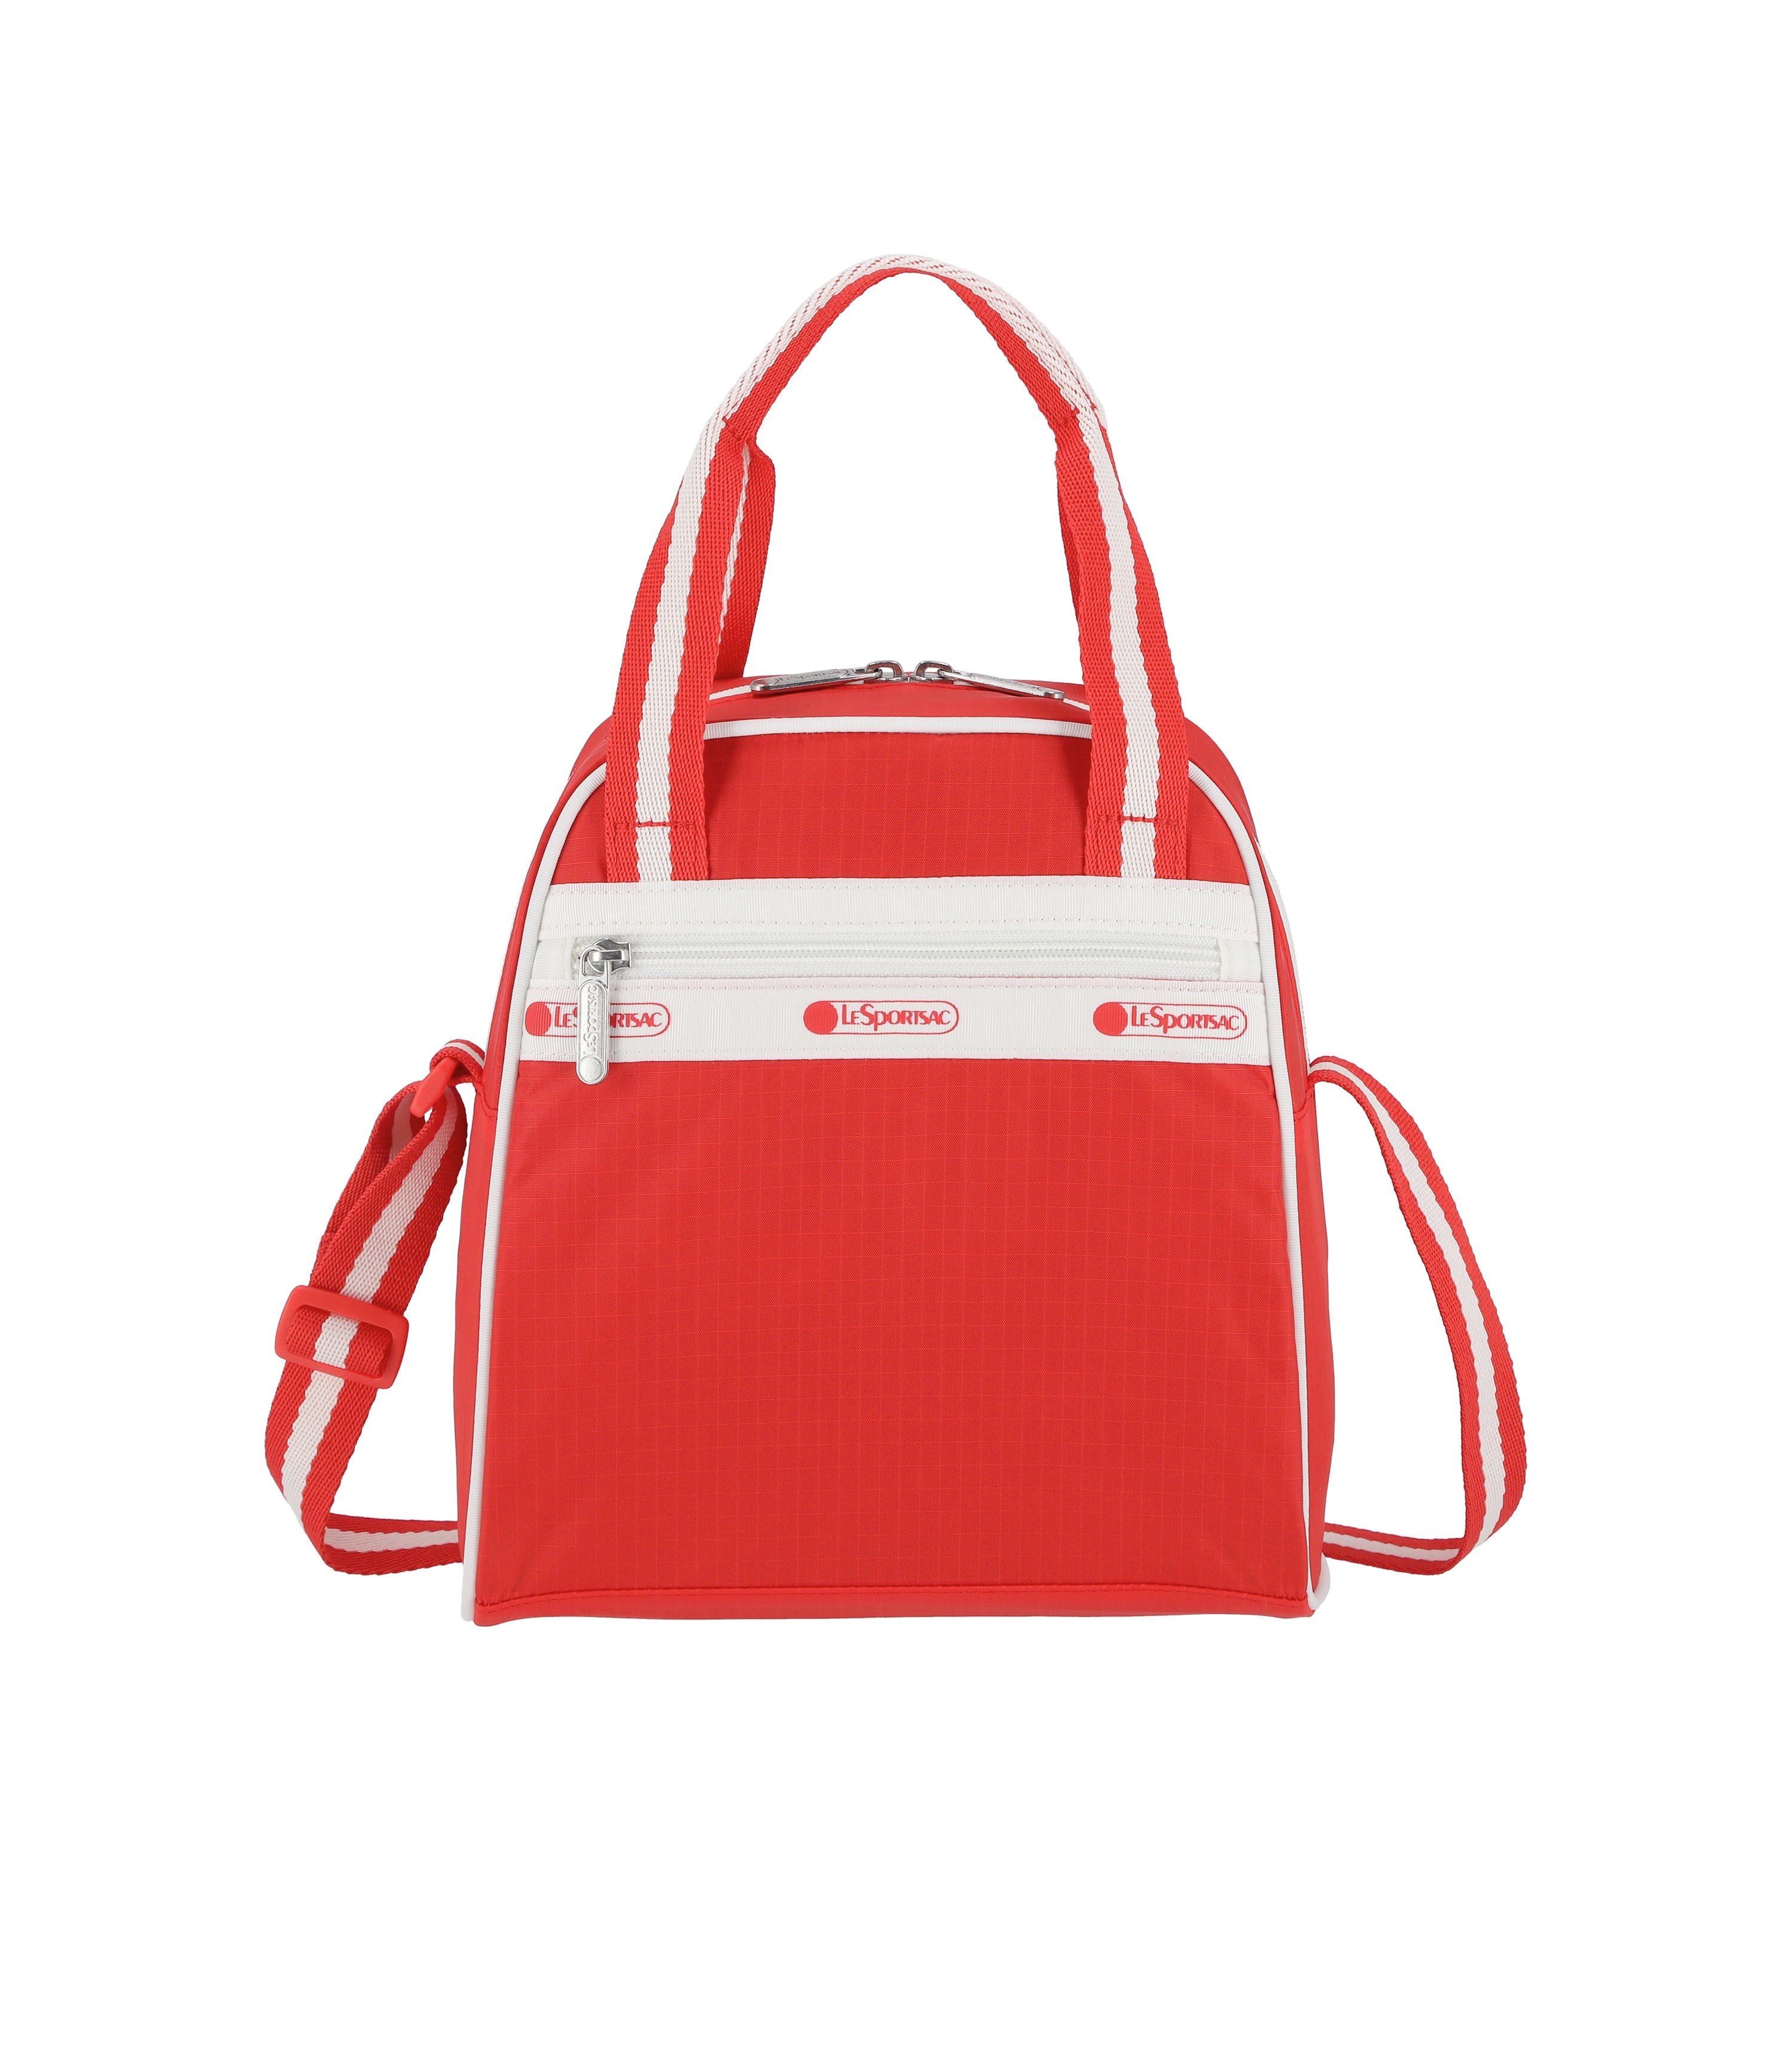 North/South Mini Satchel - Spectator Rouge Red